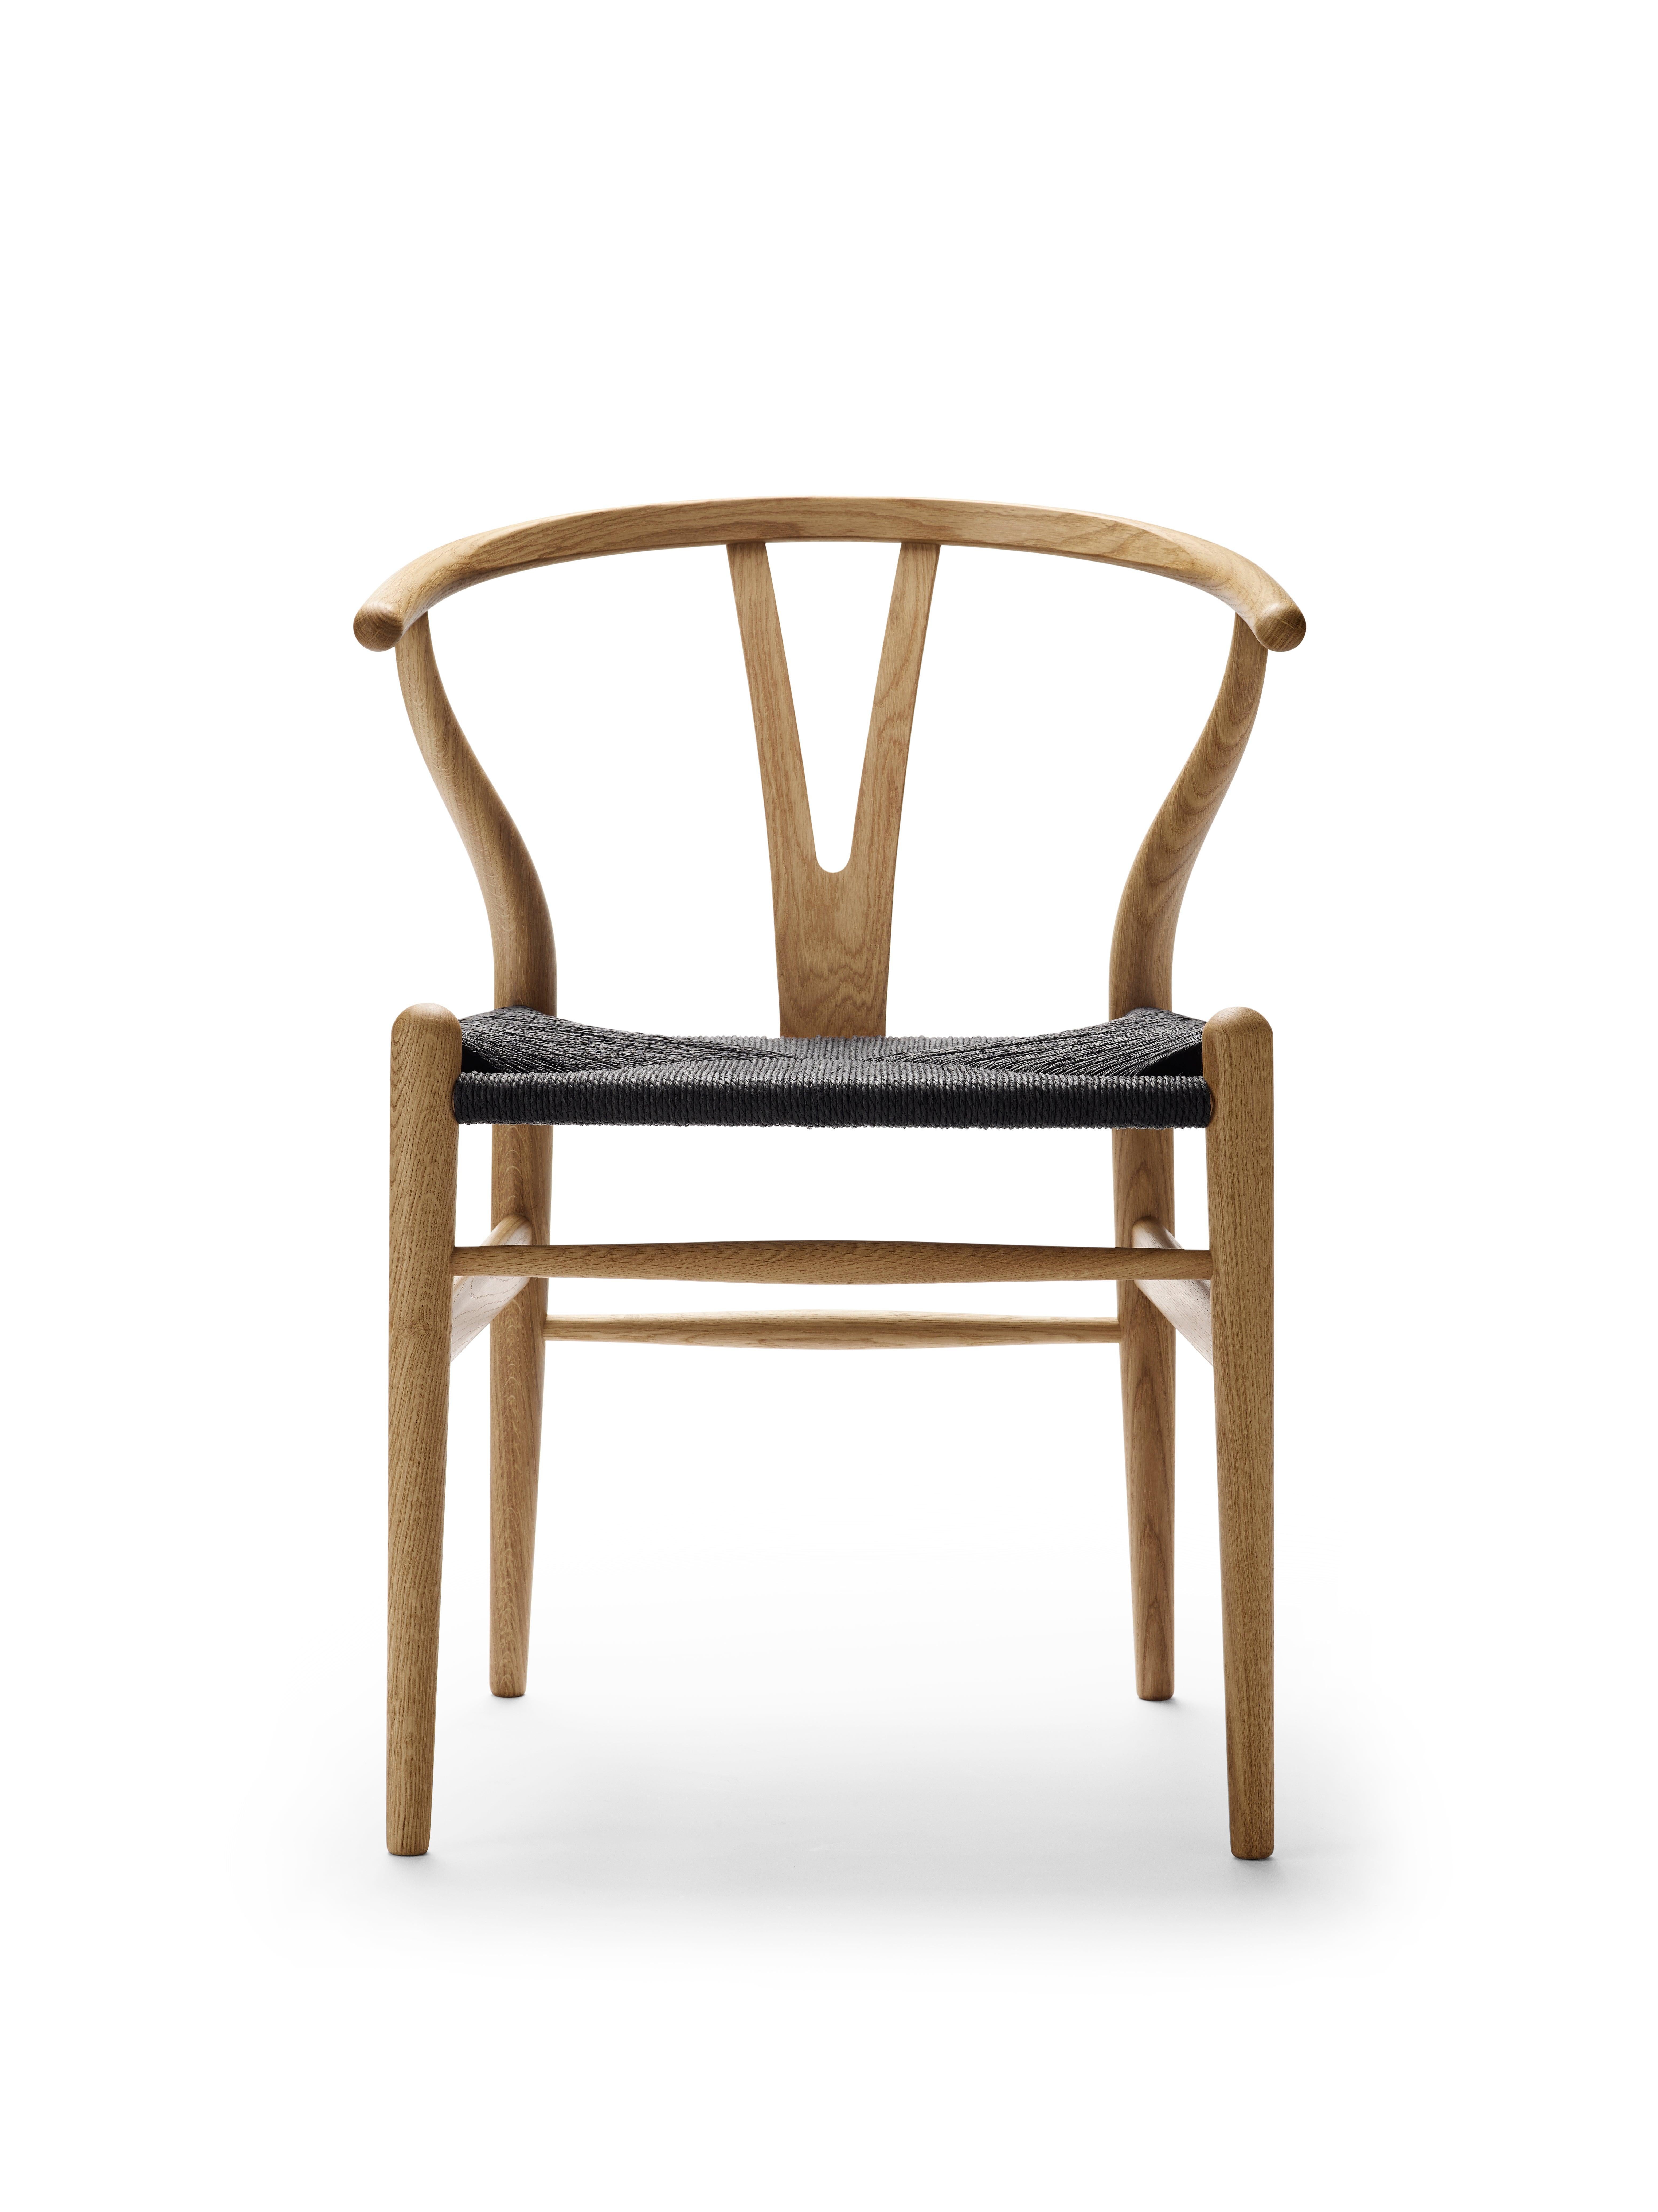 With a form that is uniquely its own, the iconic CH24 Wishbone chair by Hans J. Wegner holds a special place in the world of modern design. When designing the CH24, Wegner chose to combine the back and armrest into a single piece. To give stability